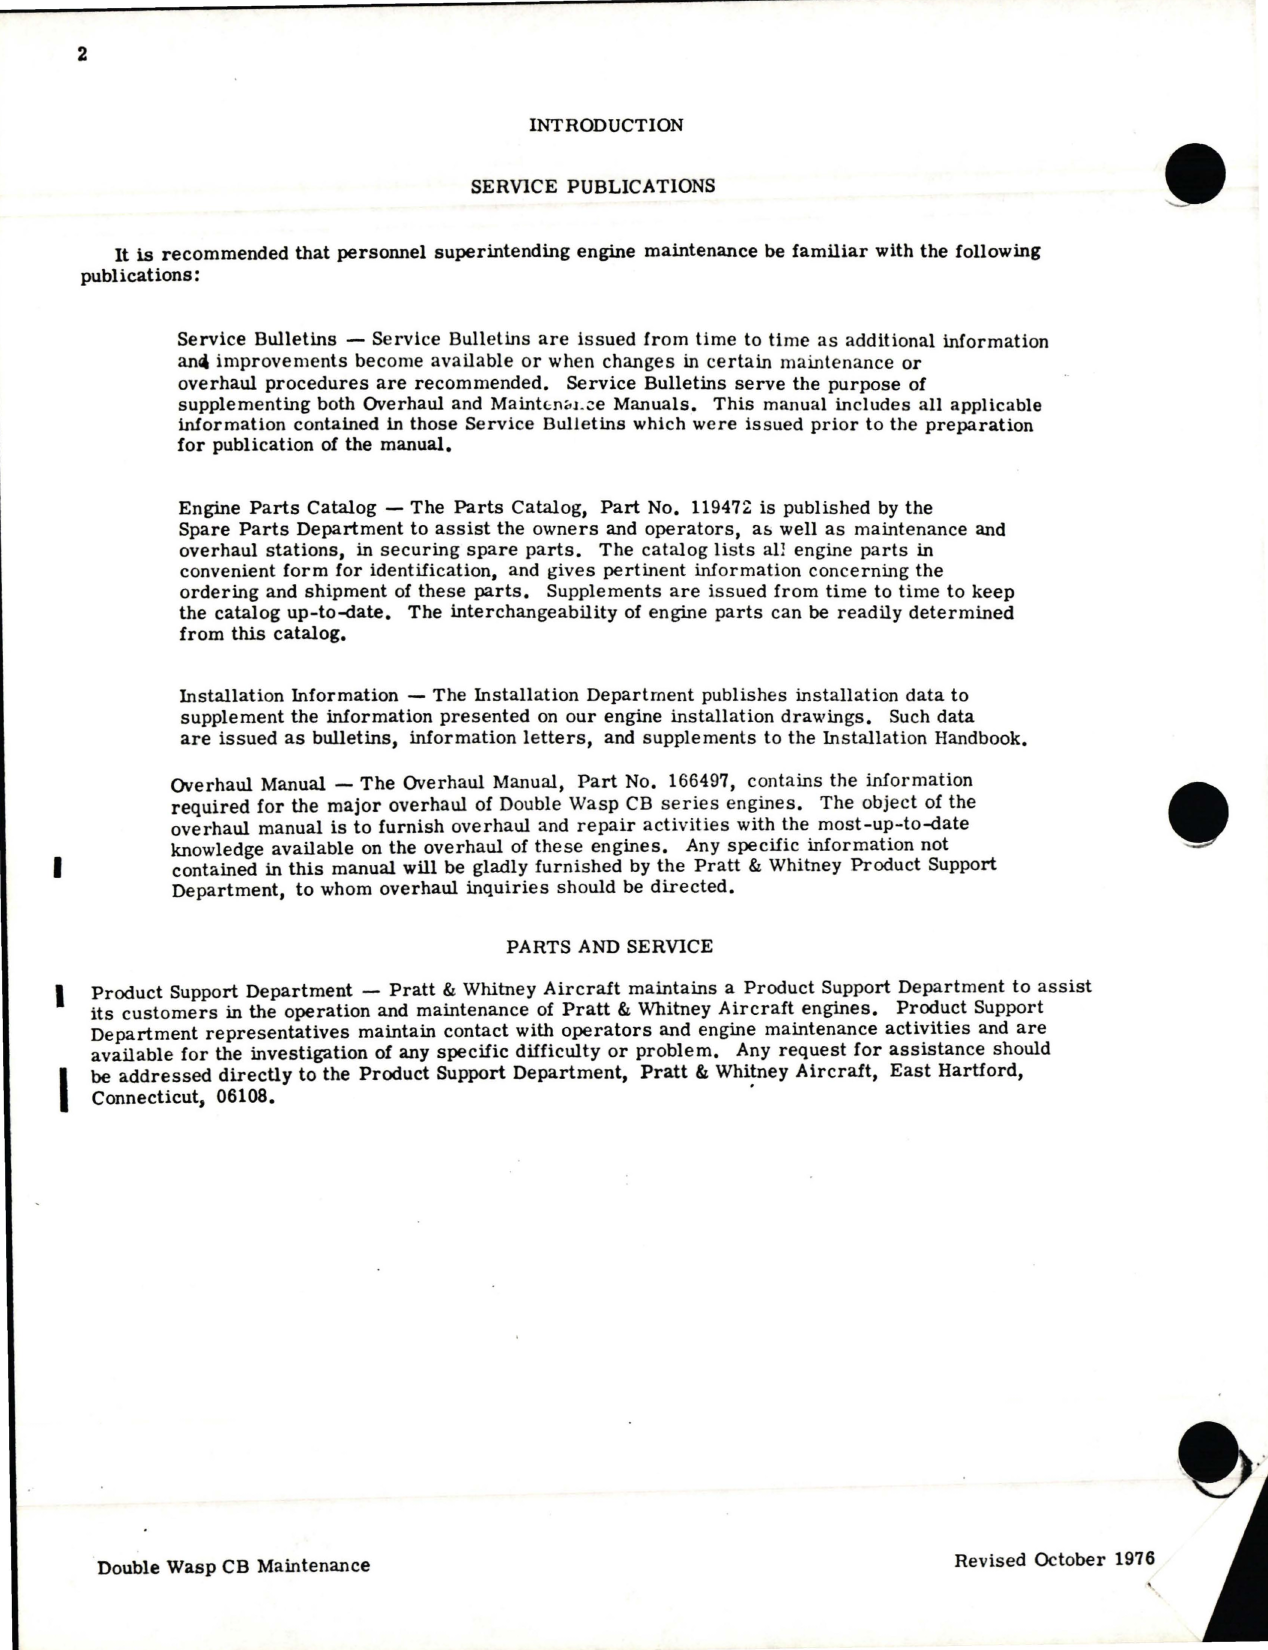 Sample page 8 from AirCorps Library document: Maintenance Manual for Double Wasp CB Series - Part 166498